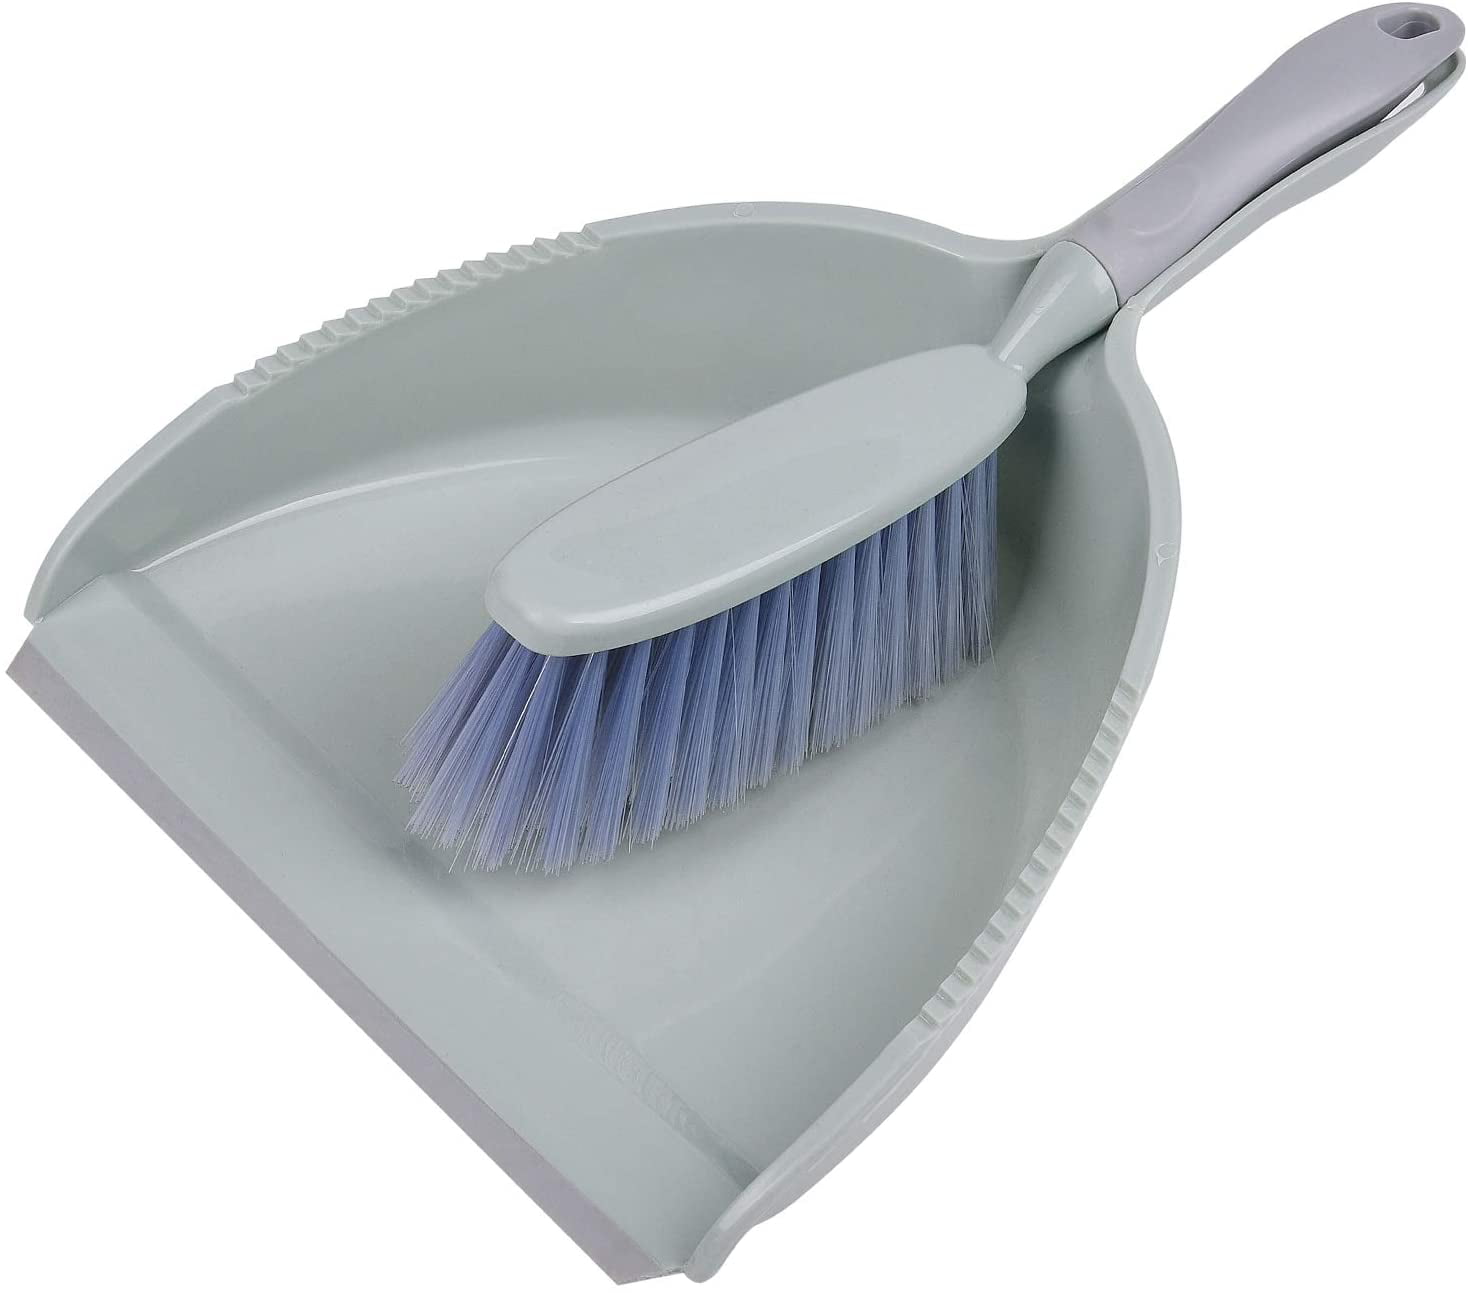 Dustpan Set Small Broom Household Hand Cleaning Brush Handle Ideal Home Desktop 